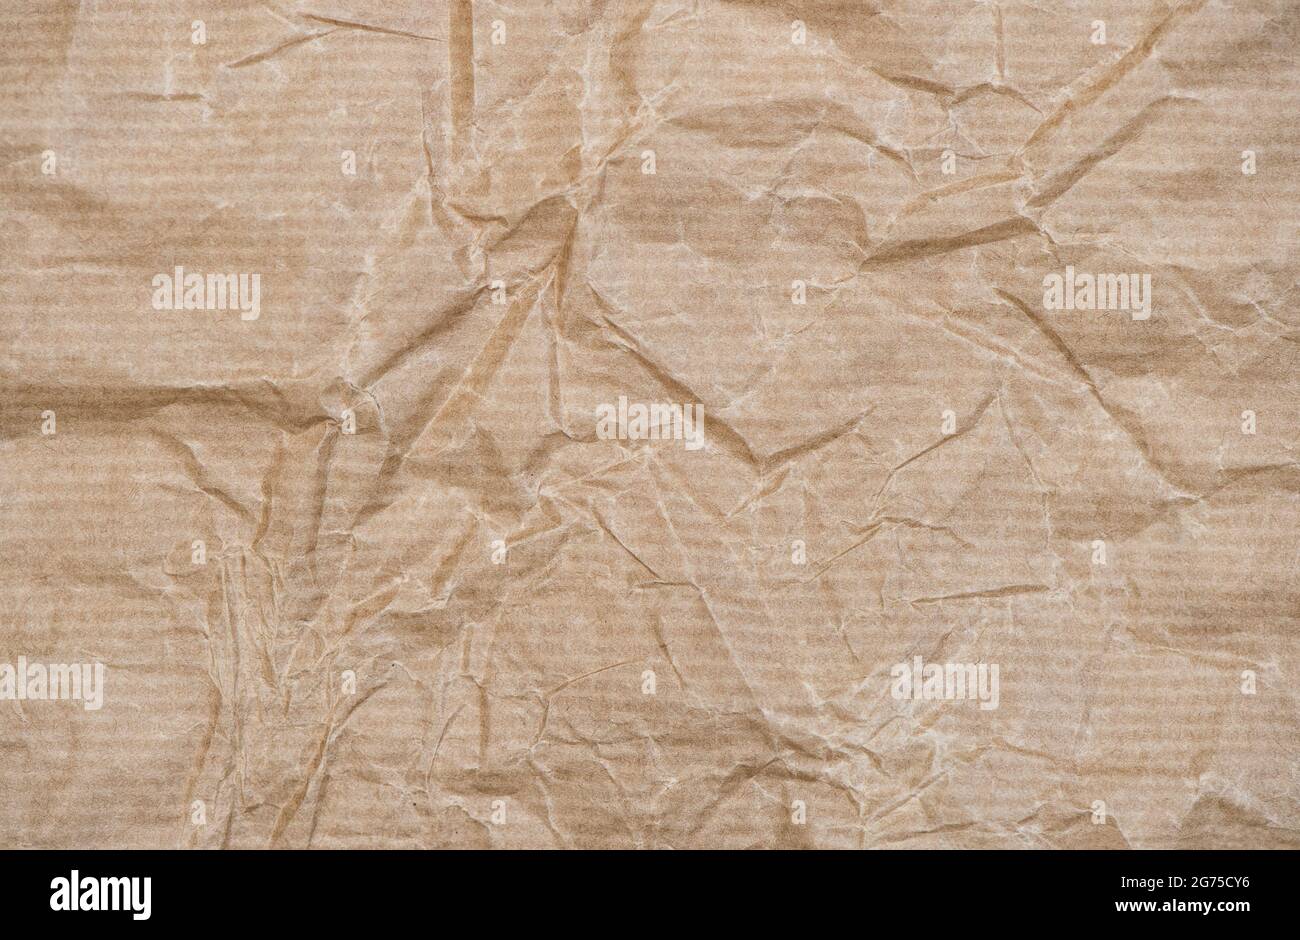 Recycled crumpled paper texture. Craft paper cardboard background Stock Photo